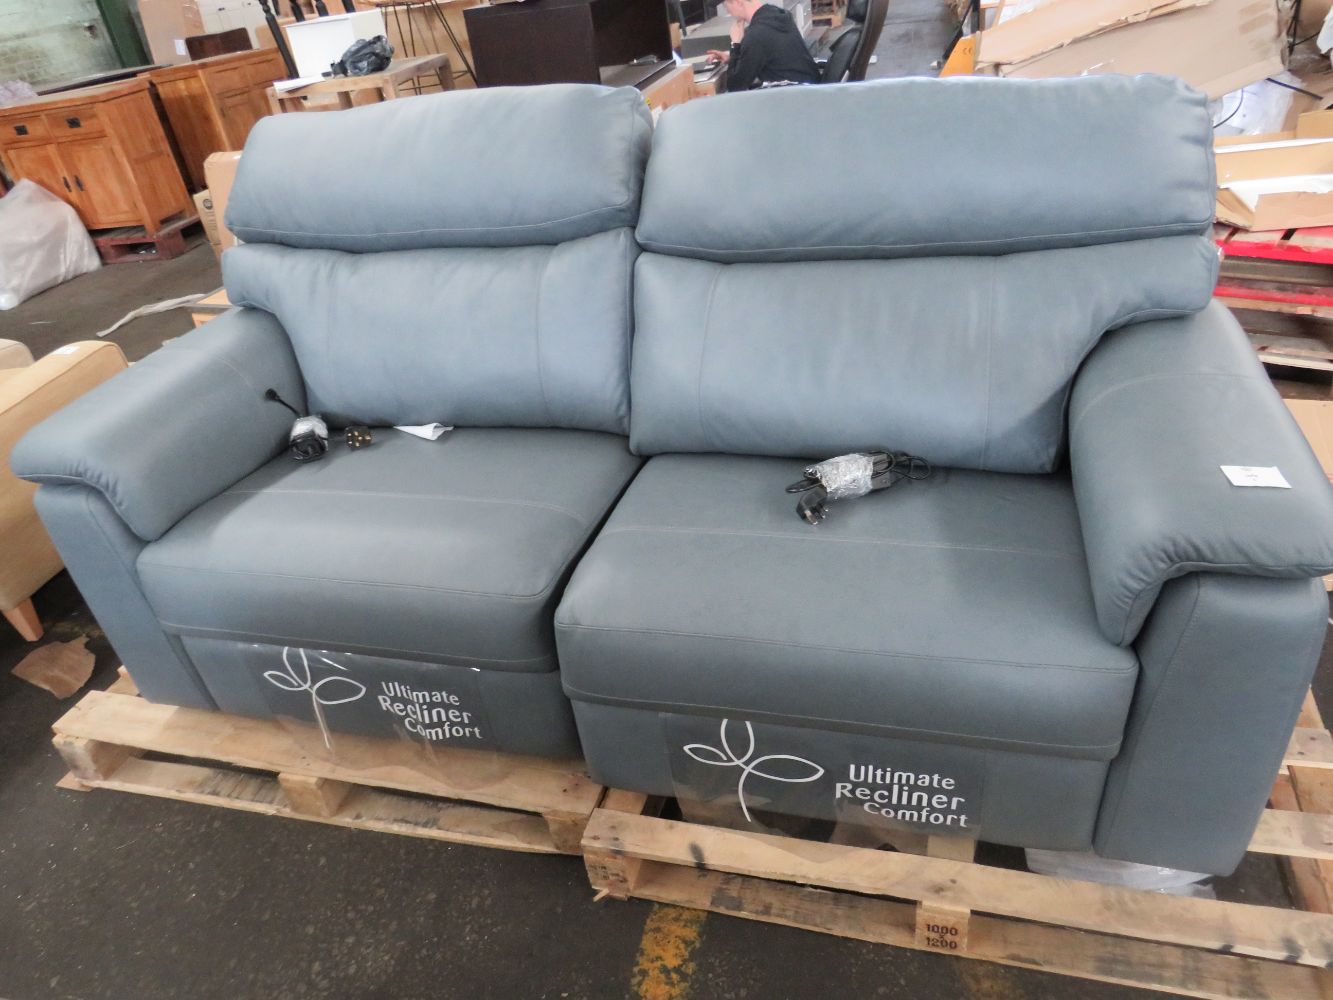 Sofas and chairs from Swoon, Costco and more at low prices.